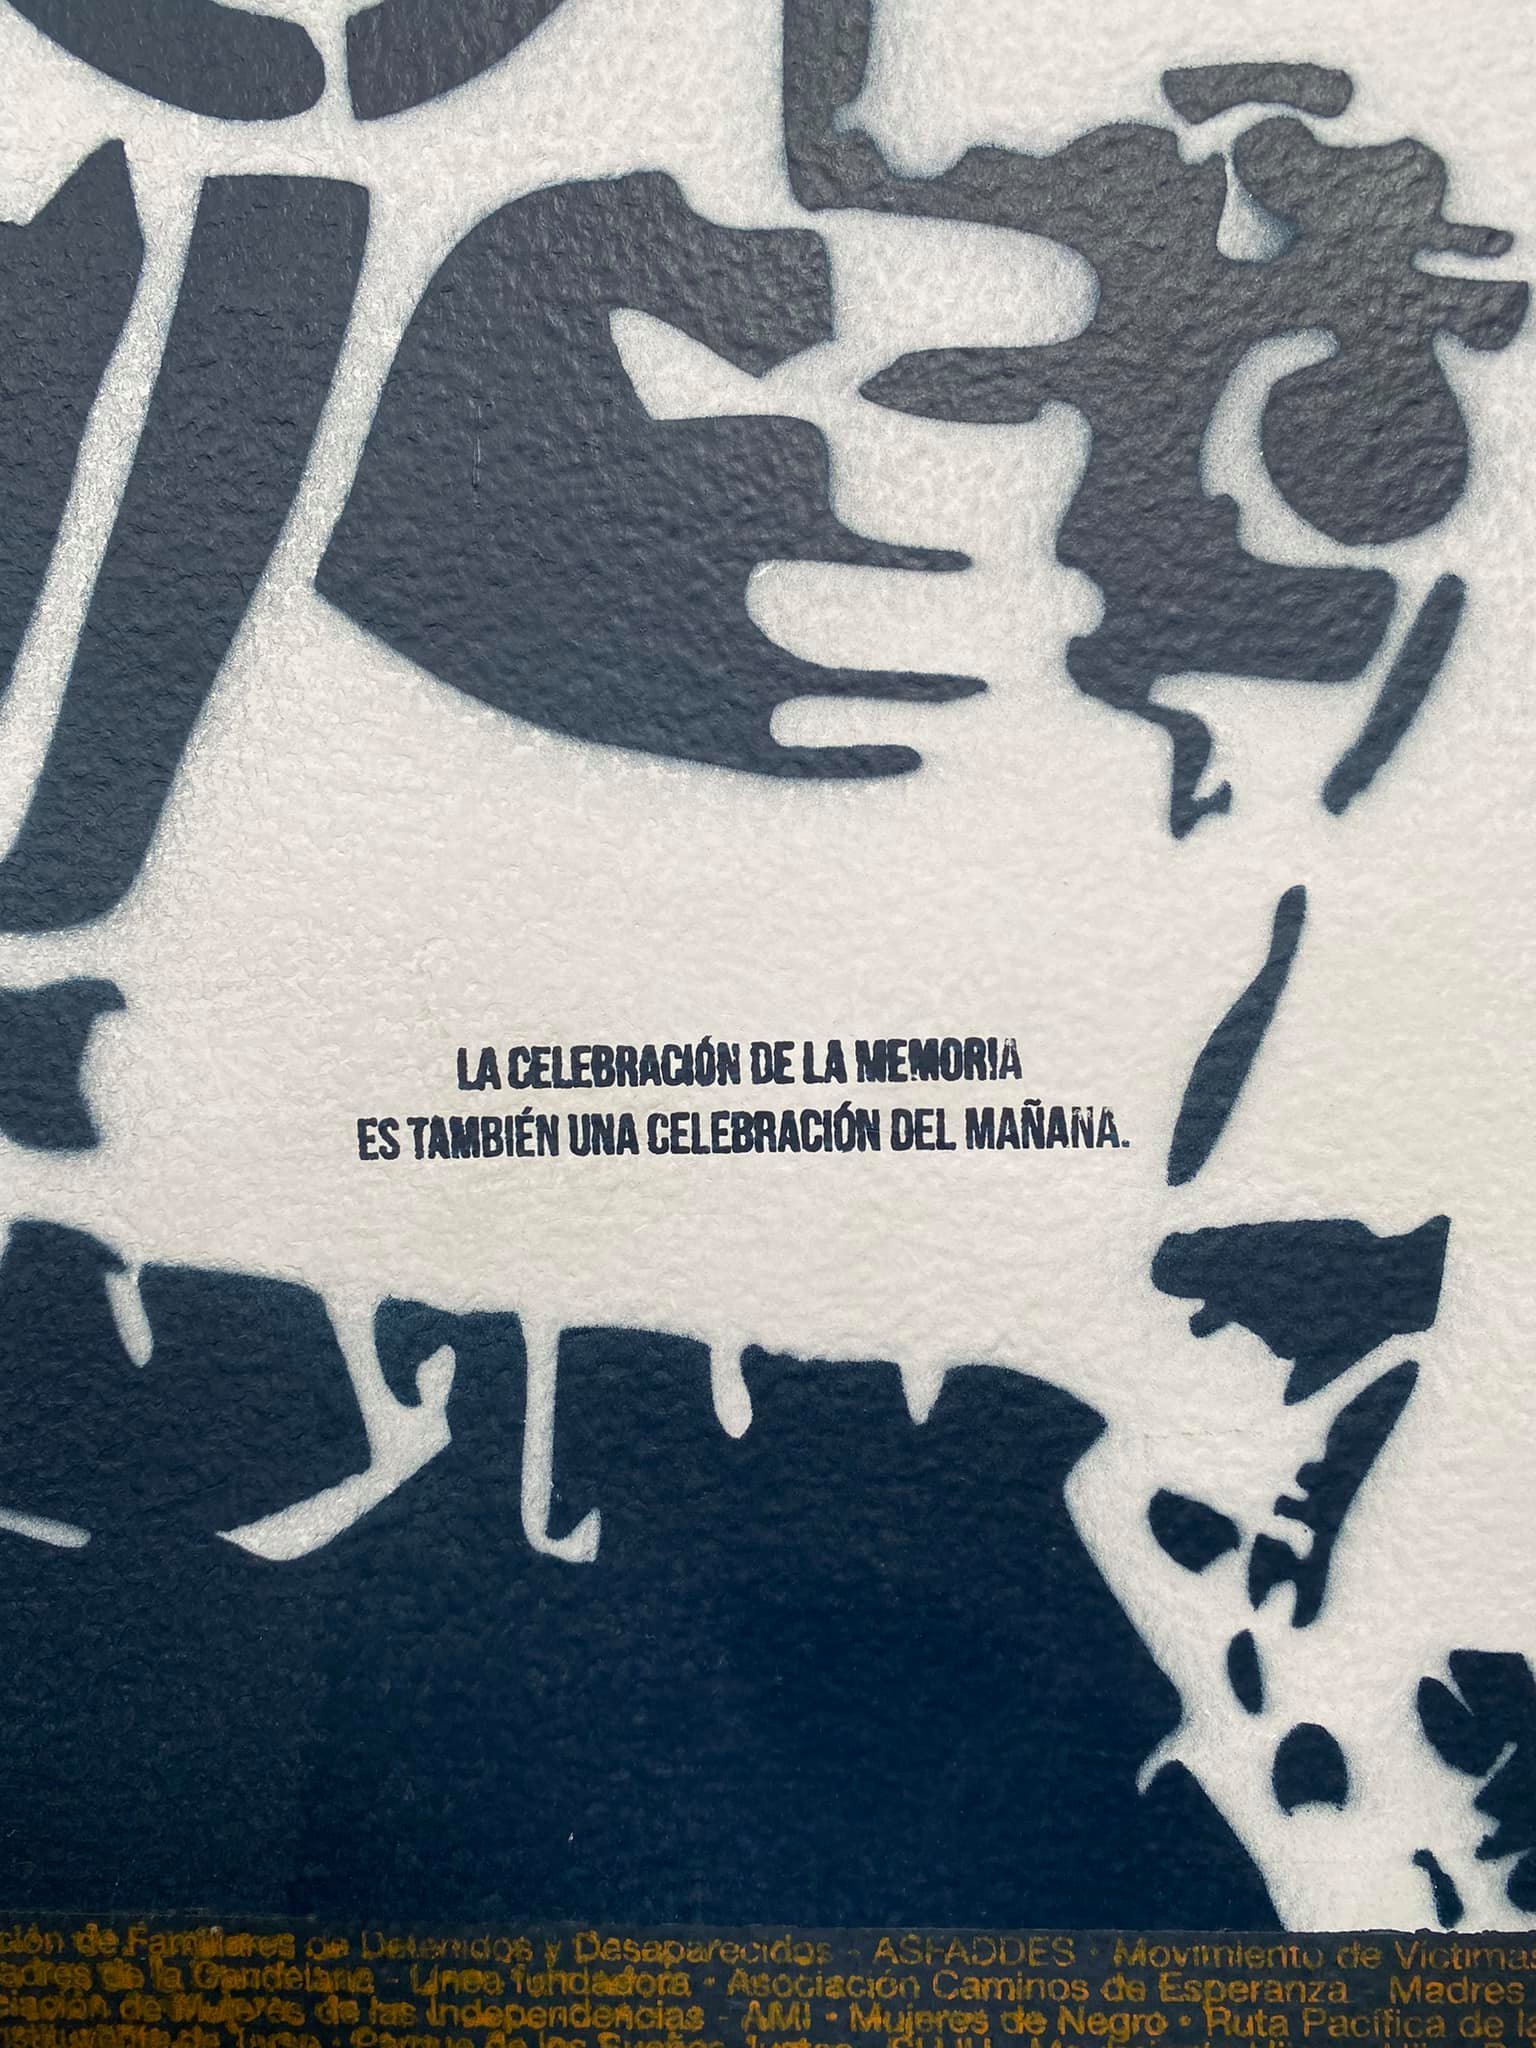  “The celebration of memory is also a celebration of tomorrow.” On the wall at the Casa de la Memoria 